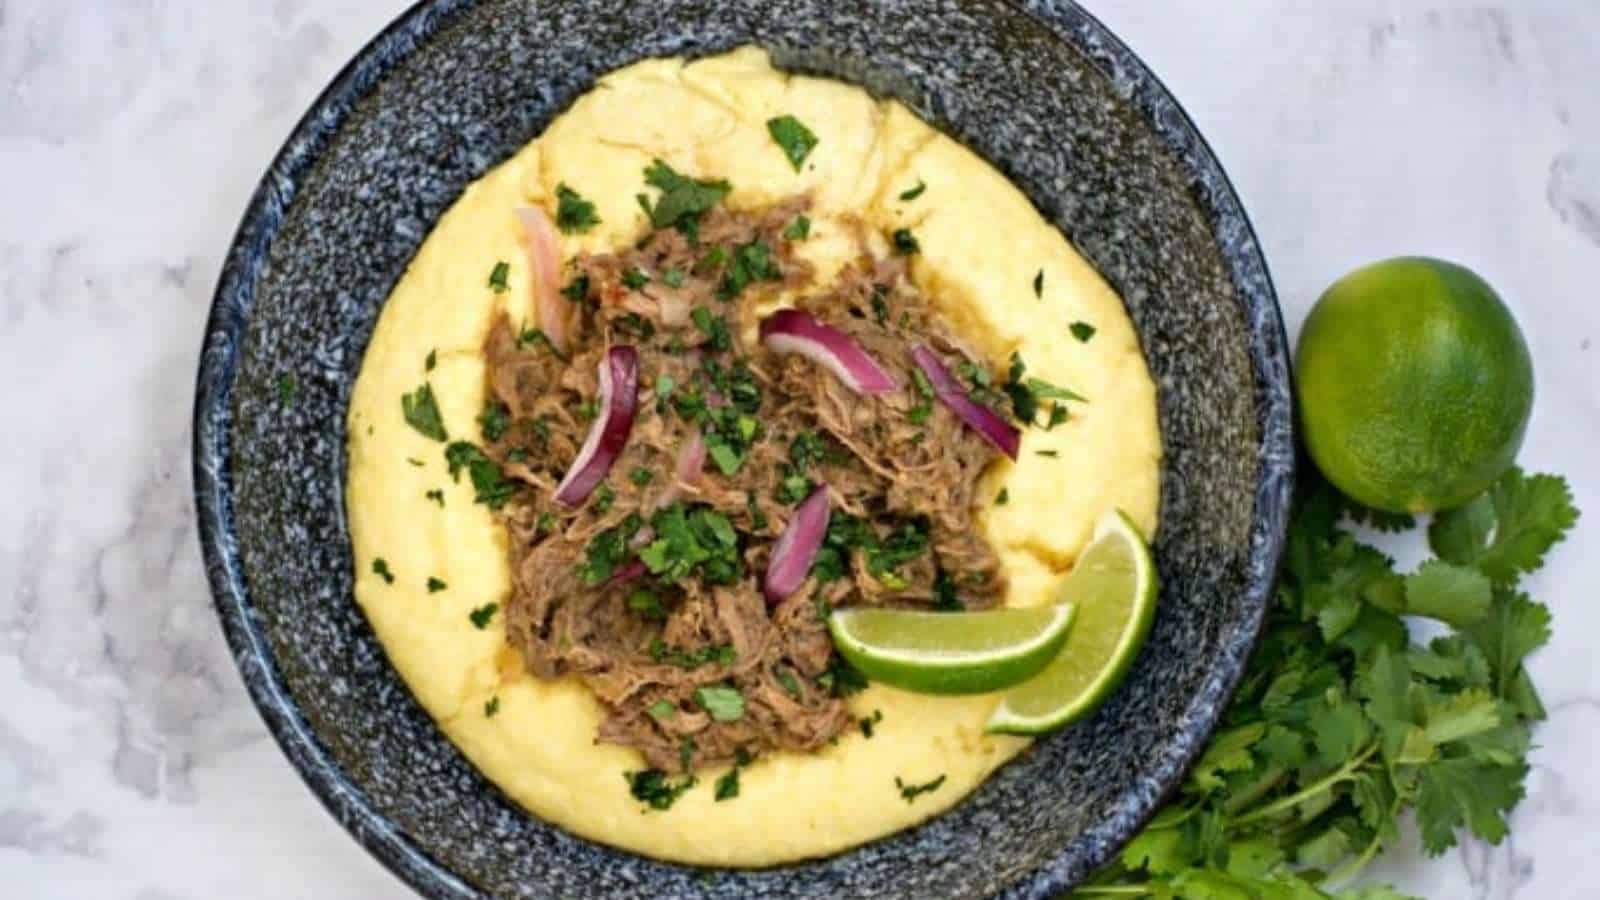 A bowl of polenta with meat and garnishes.